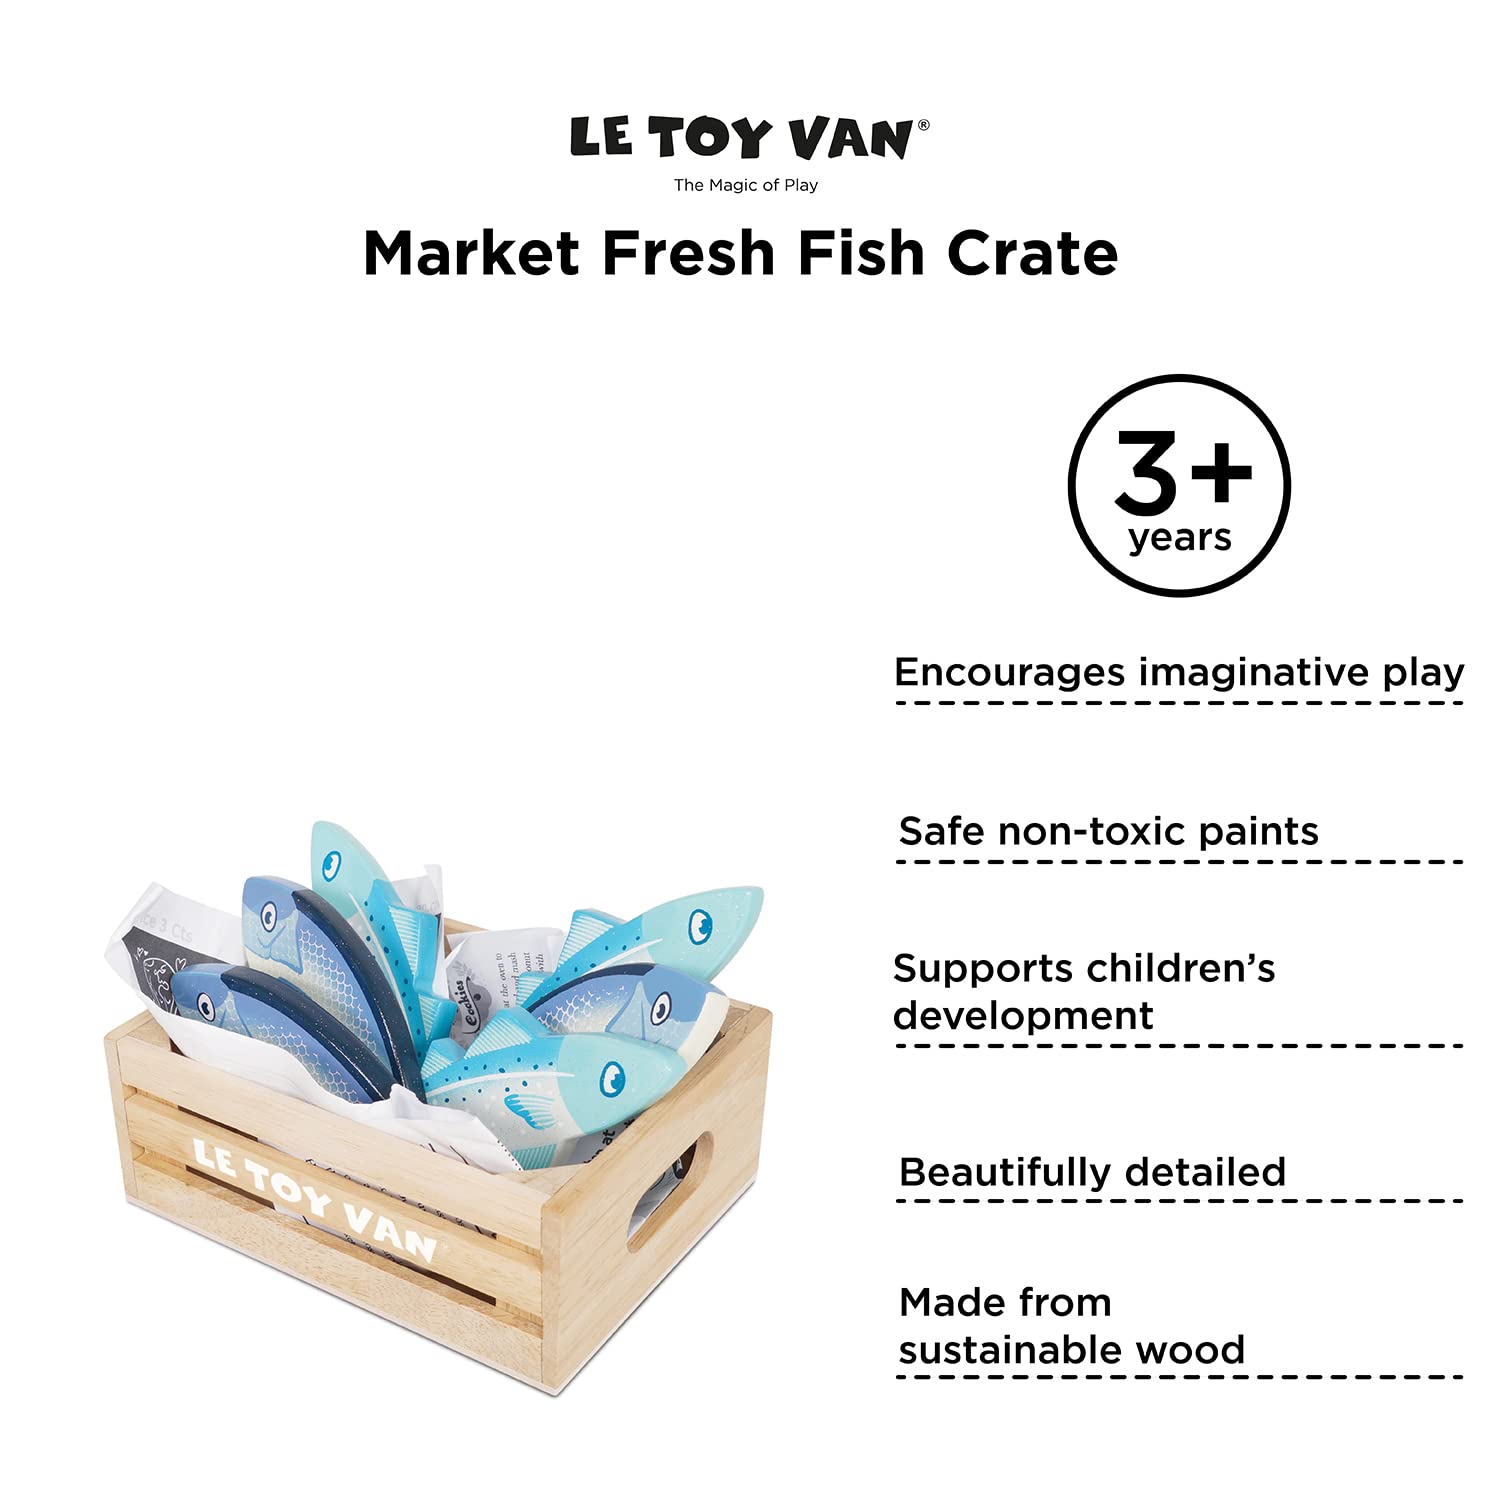 Le Toy Van - Wooden Honeybee Market Fresh Fish Crate | Wooden Role Play Toy | Supermarket Pretend Play Shop Food